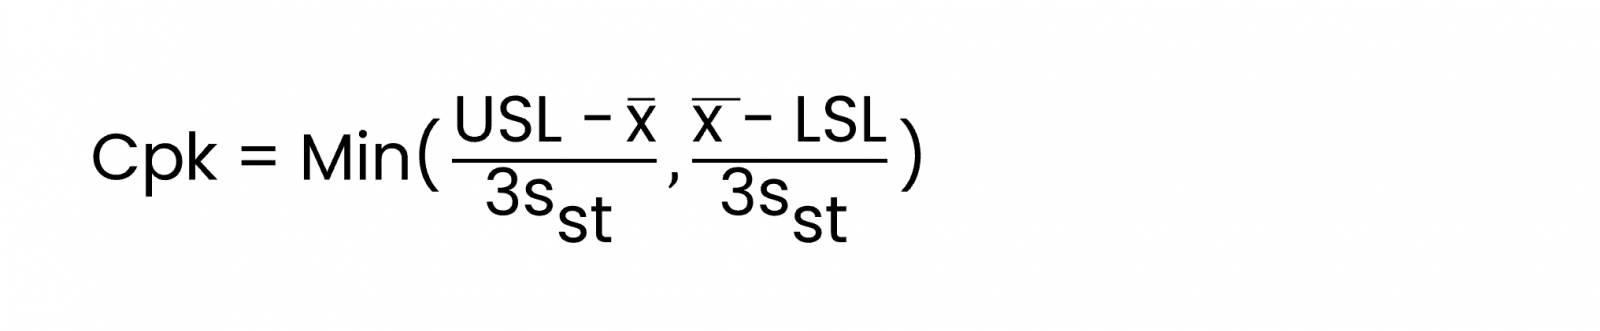 Calculate Cpk Critical process capability. Use this formula. The equation is about Lower and Upper Specification Limit.